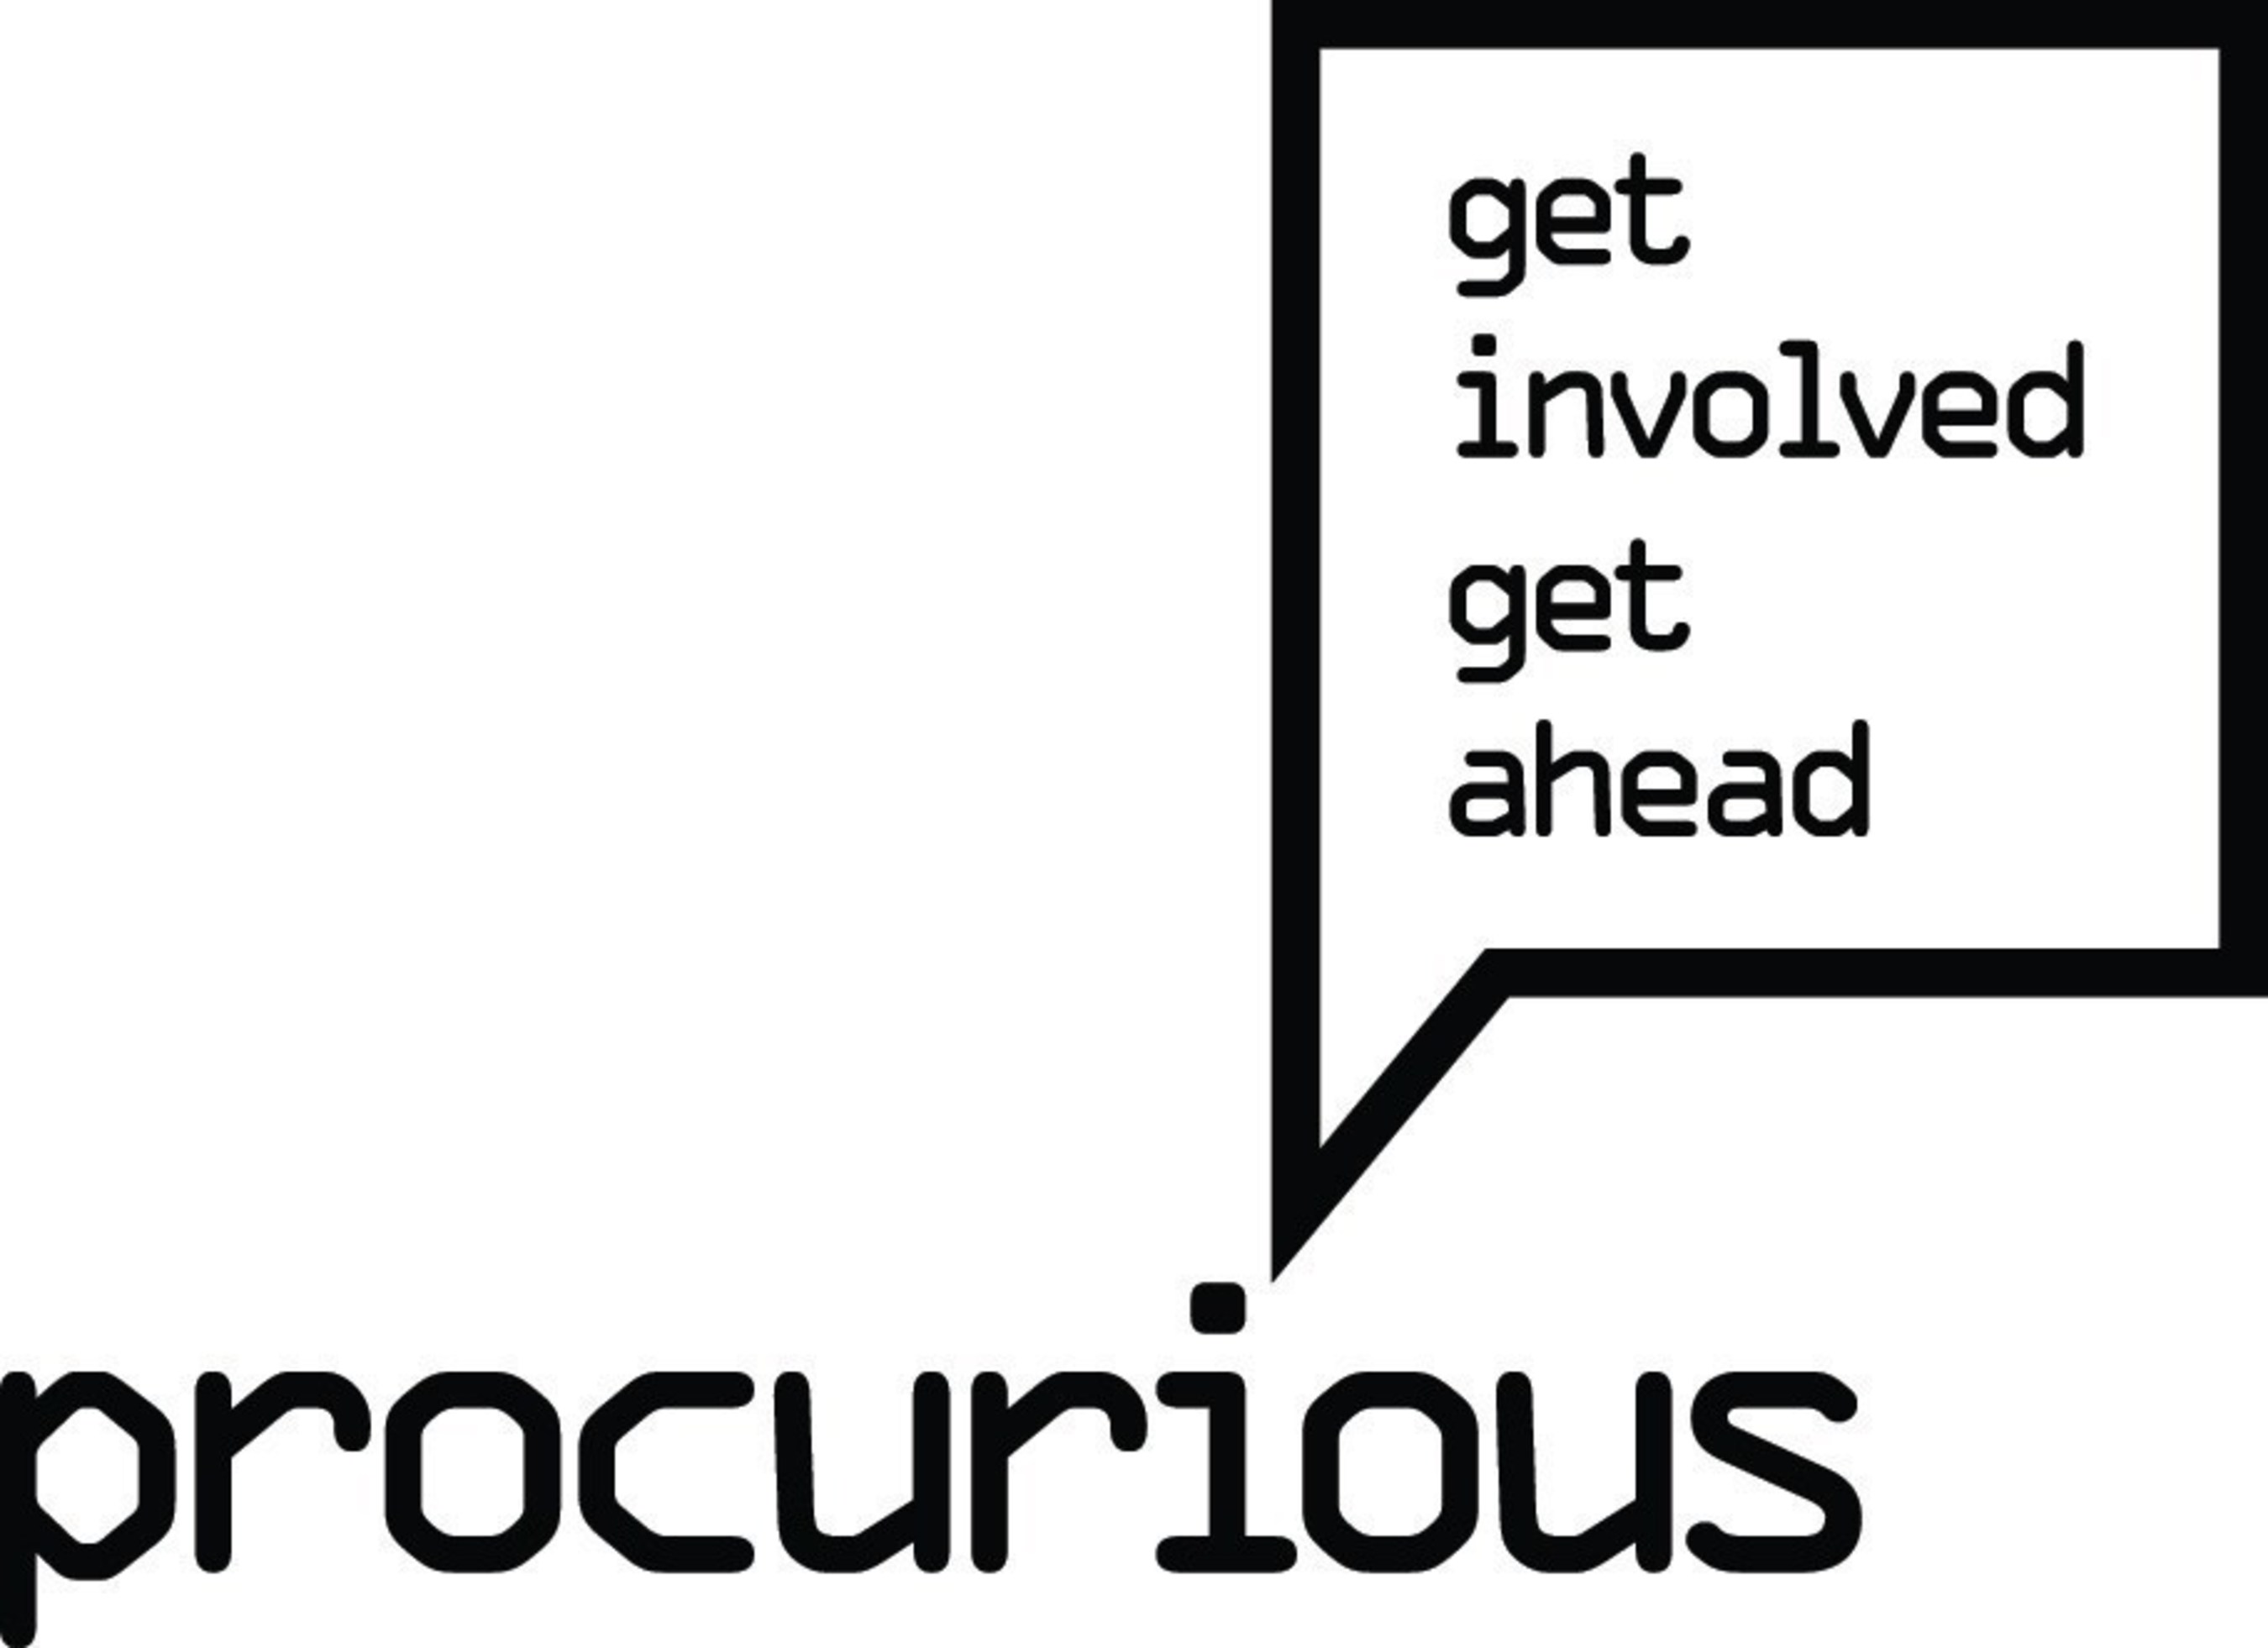 Procurious is the world's first online business community dedicated to procurement and supply chain professionals.